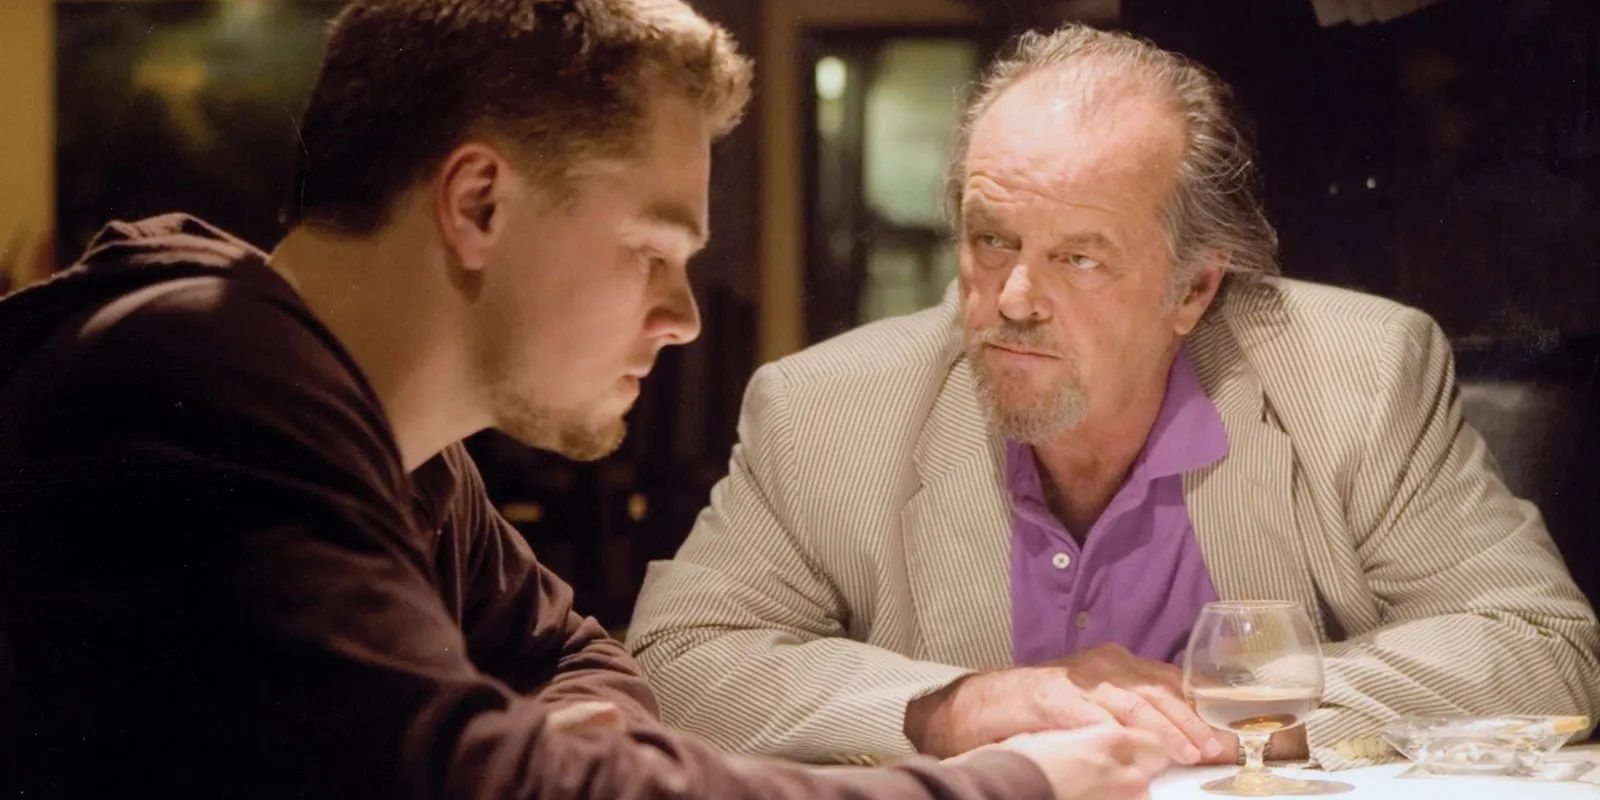 Jack Nicholson and Leonardo DiCaprio in a back room in The Departed